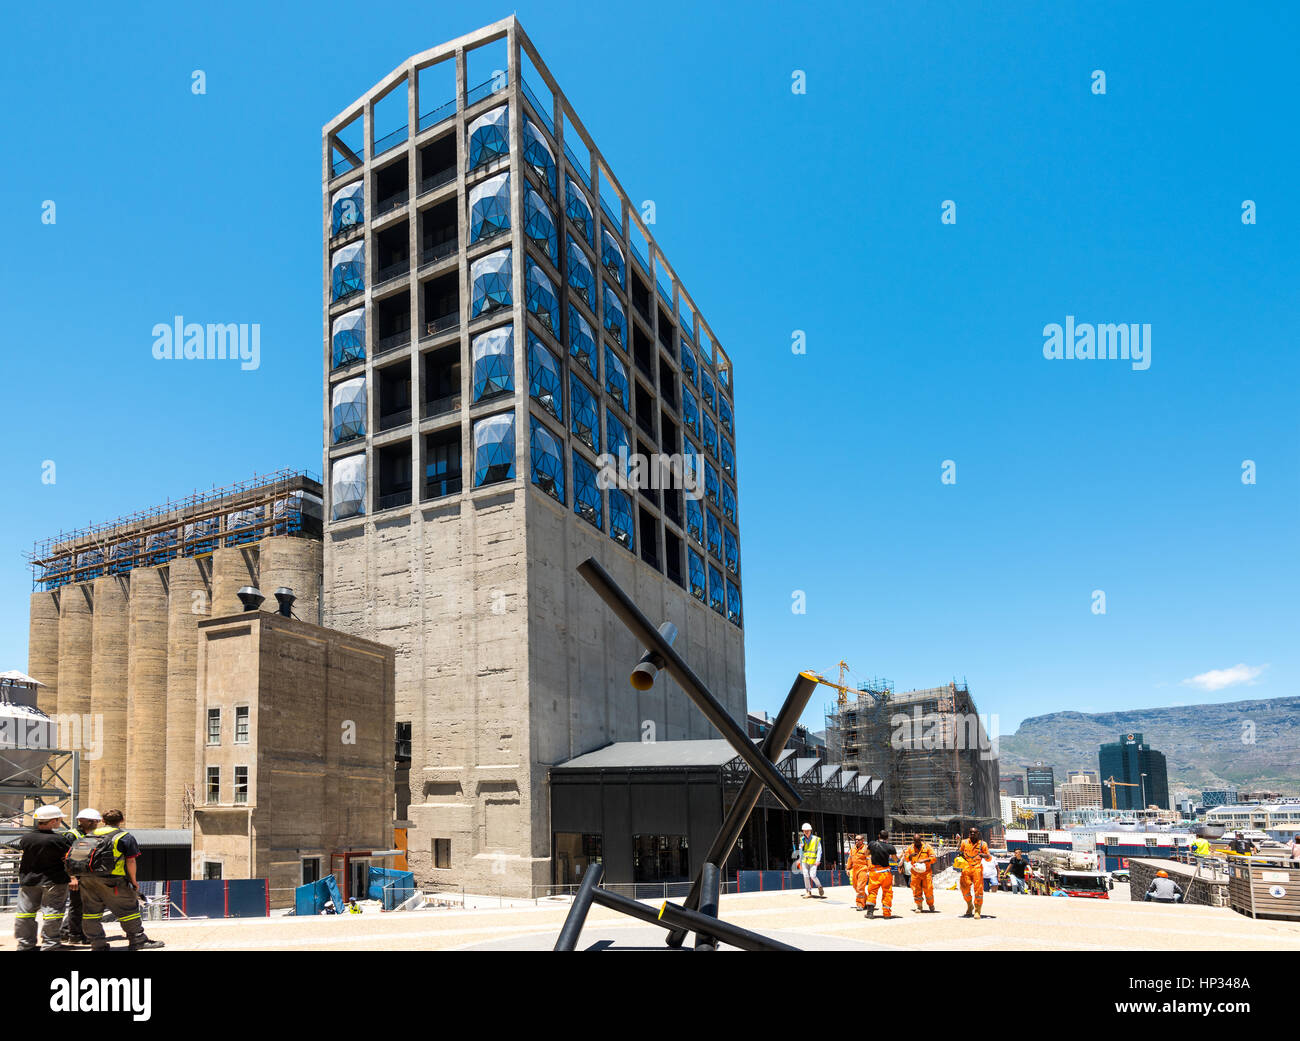 Cape Town, South Africa - December 1, 2016: Construction site of the new Zeitz Museum of Contemporary Art of Africa in Cape Town: German manager and A Stock Photo